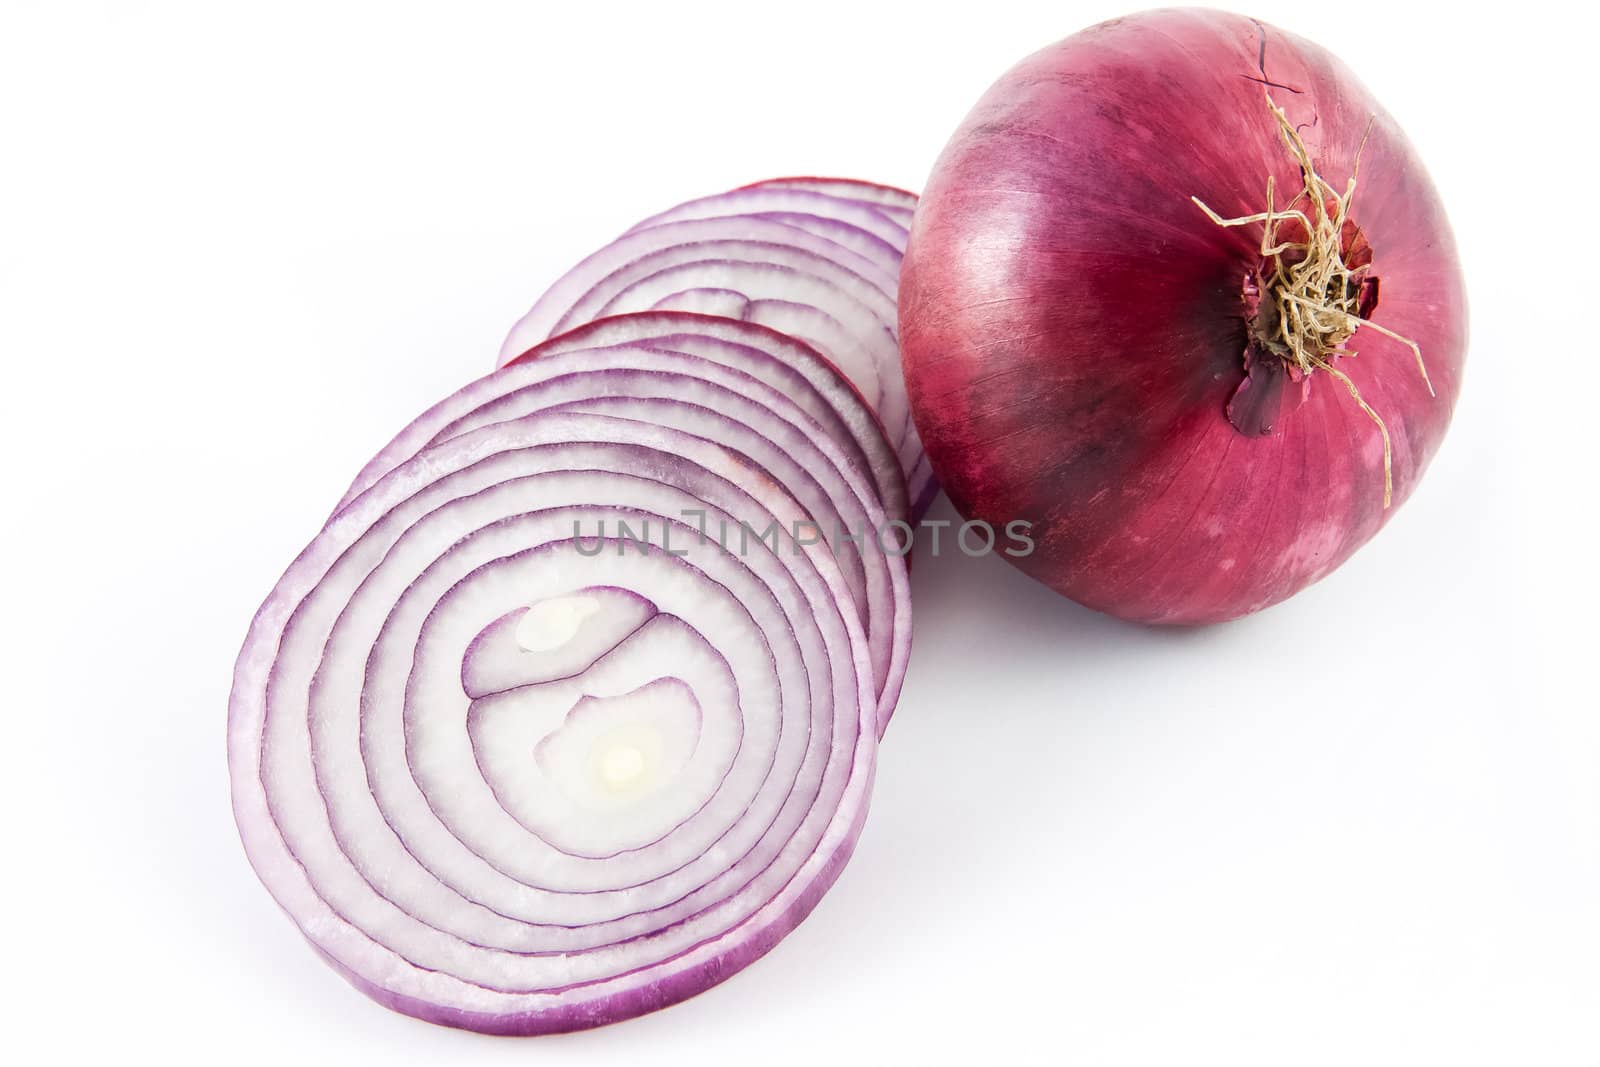 Picture of a red onion sliced up and a whole one